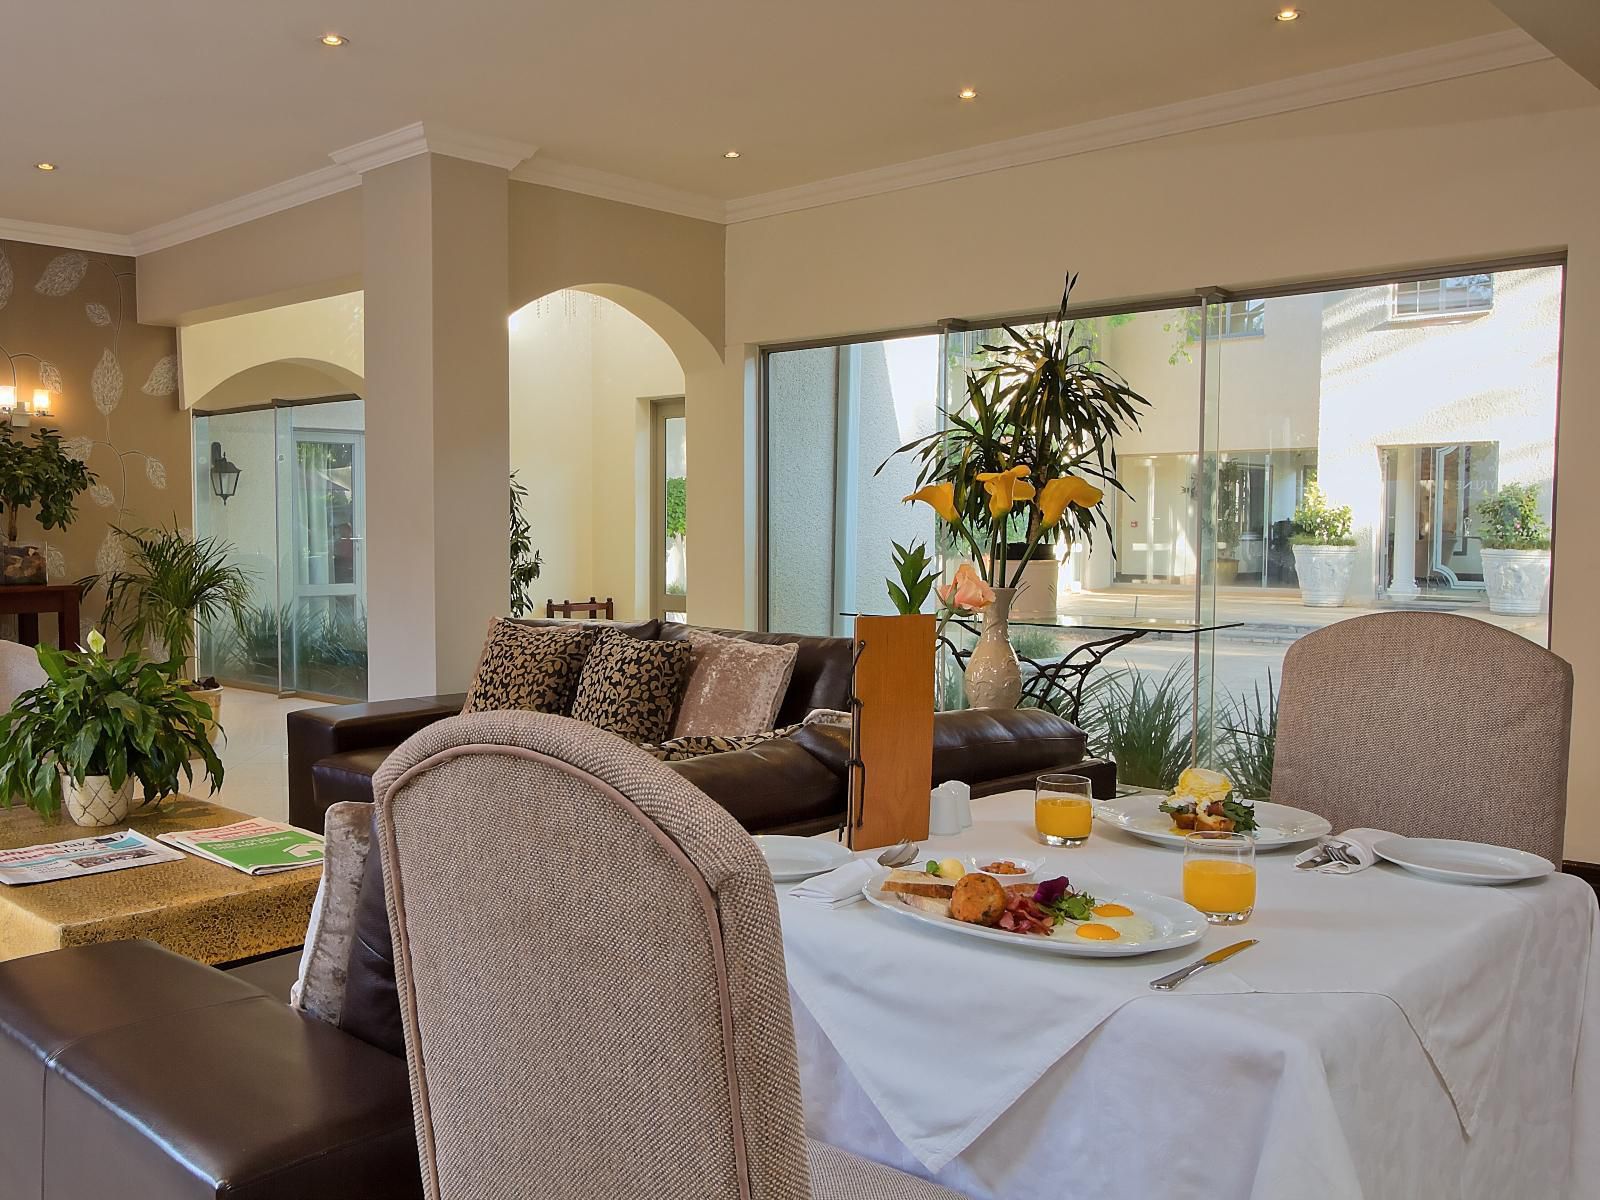 The Syrene Boutique Hotel Rivonia Johannesburg Gauteng South Africa Place Cover, Food, Living Room